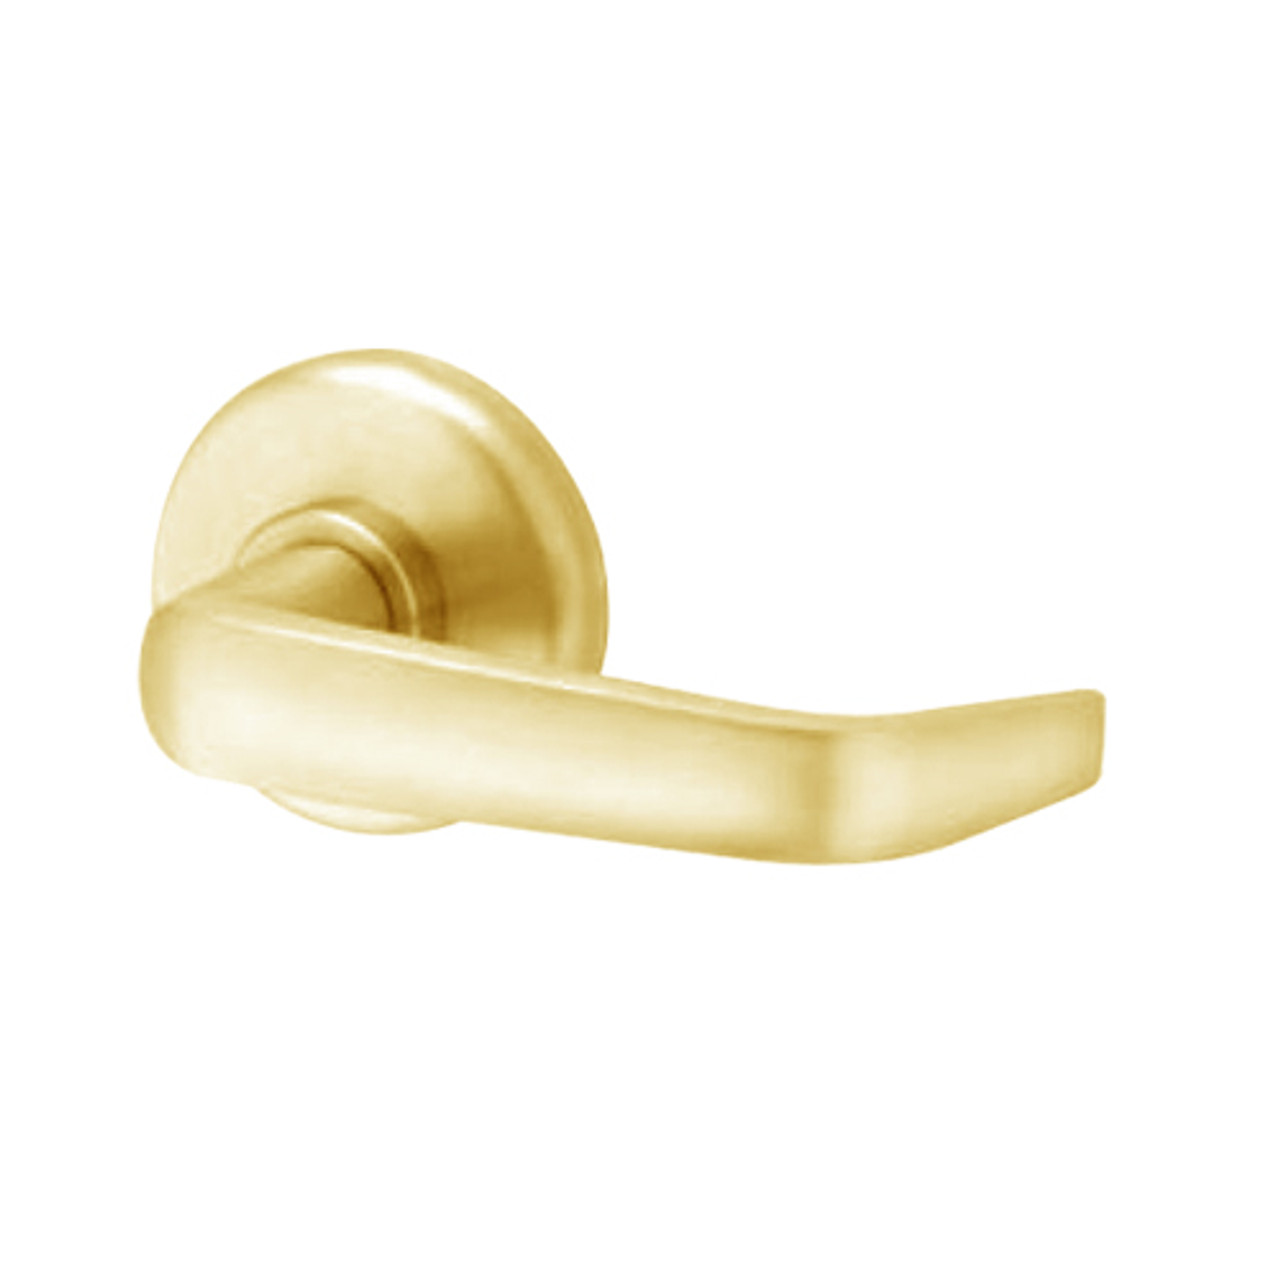 40HTKOS215R605 Best 40H Series Trim Kits Outside Lever w/ Cylinder with Contour w/ Angle Return Style in Bright Brass